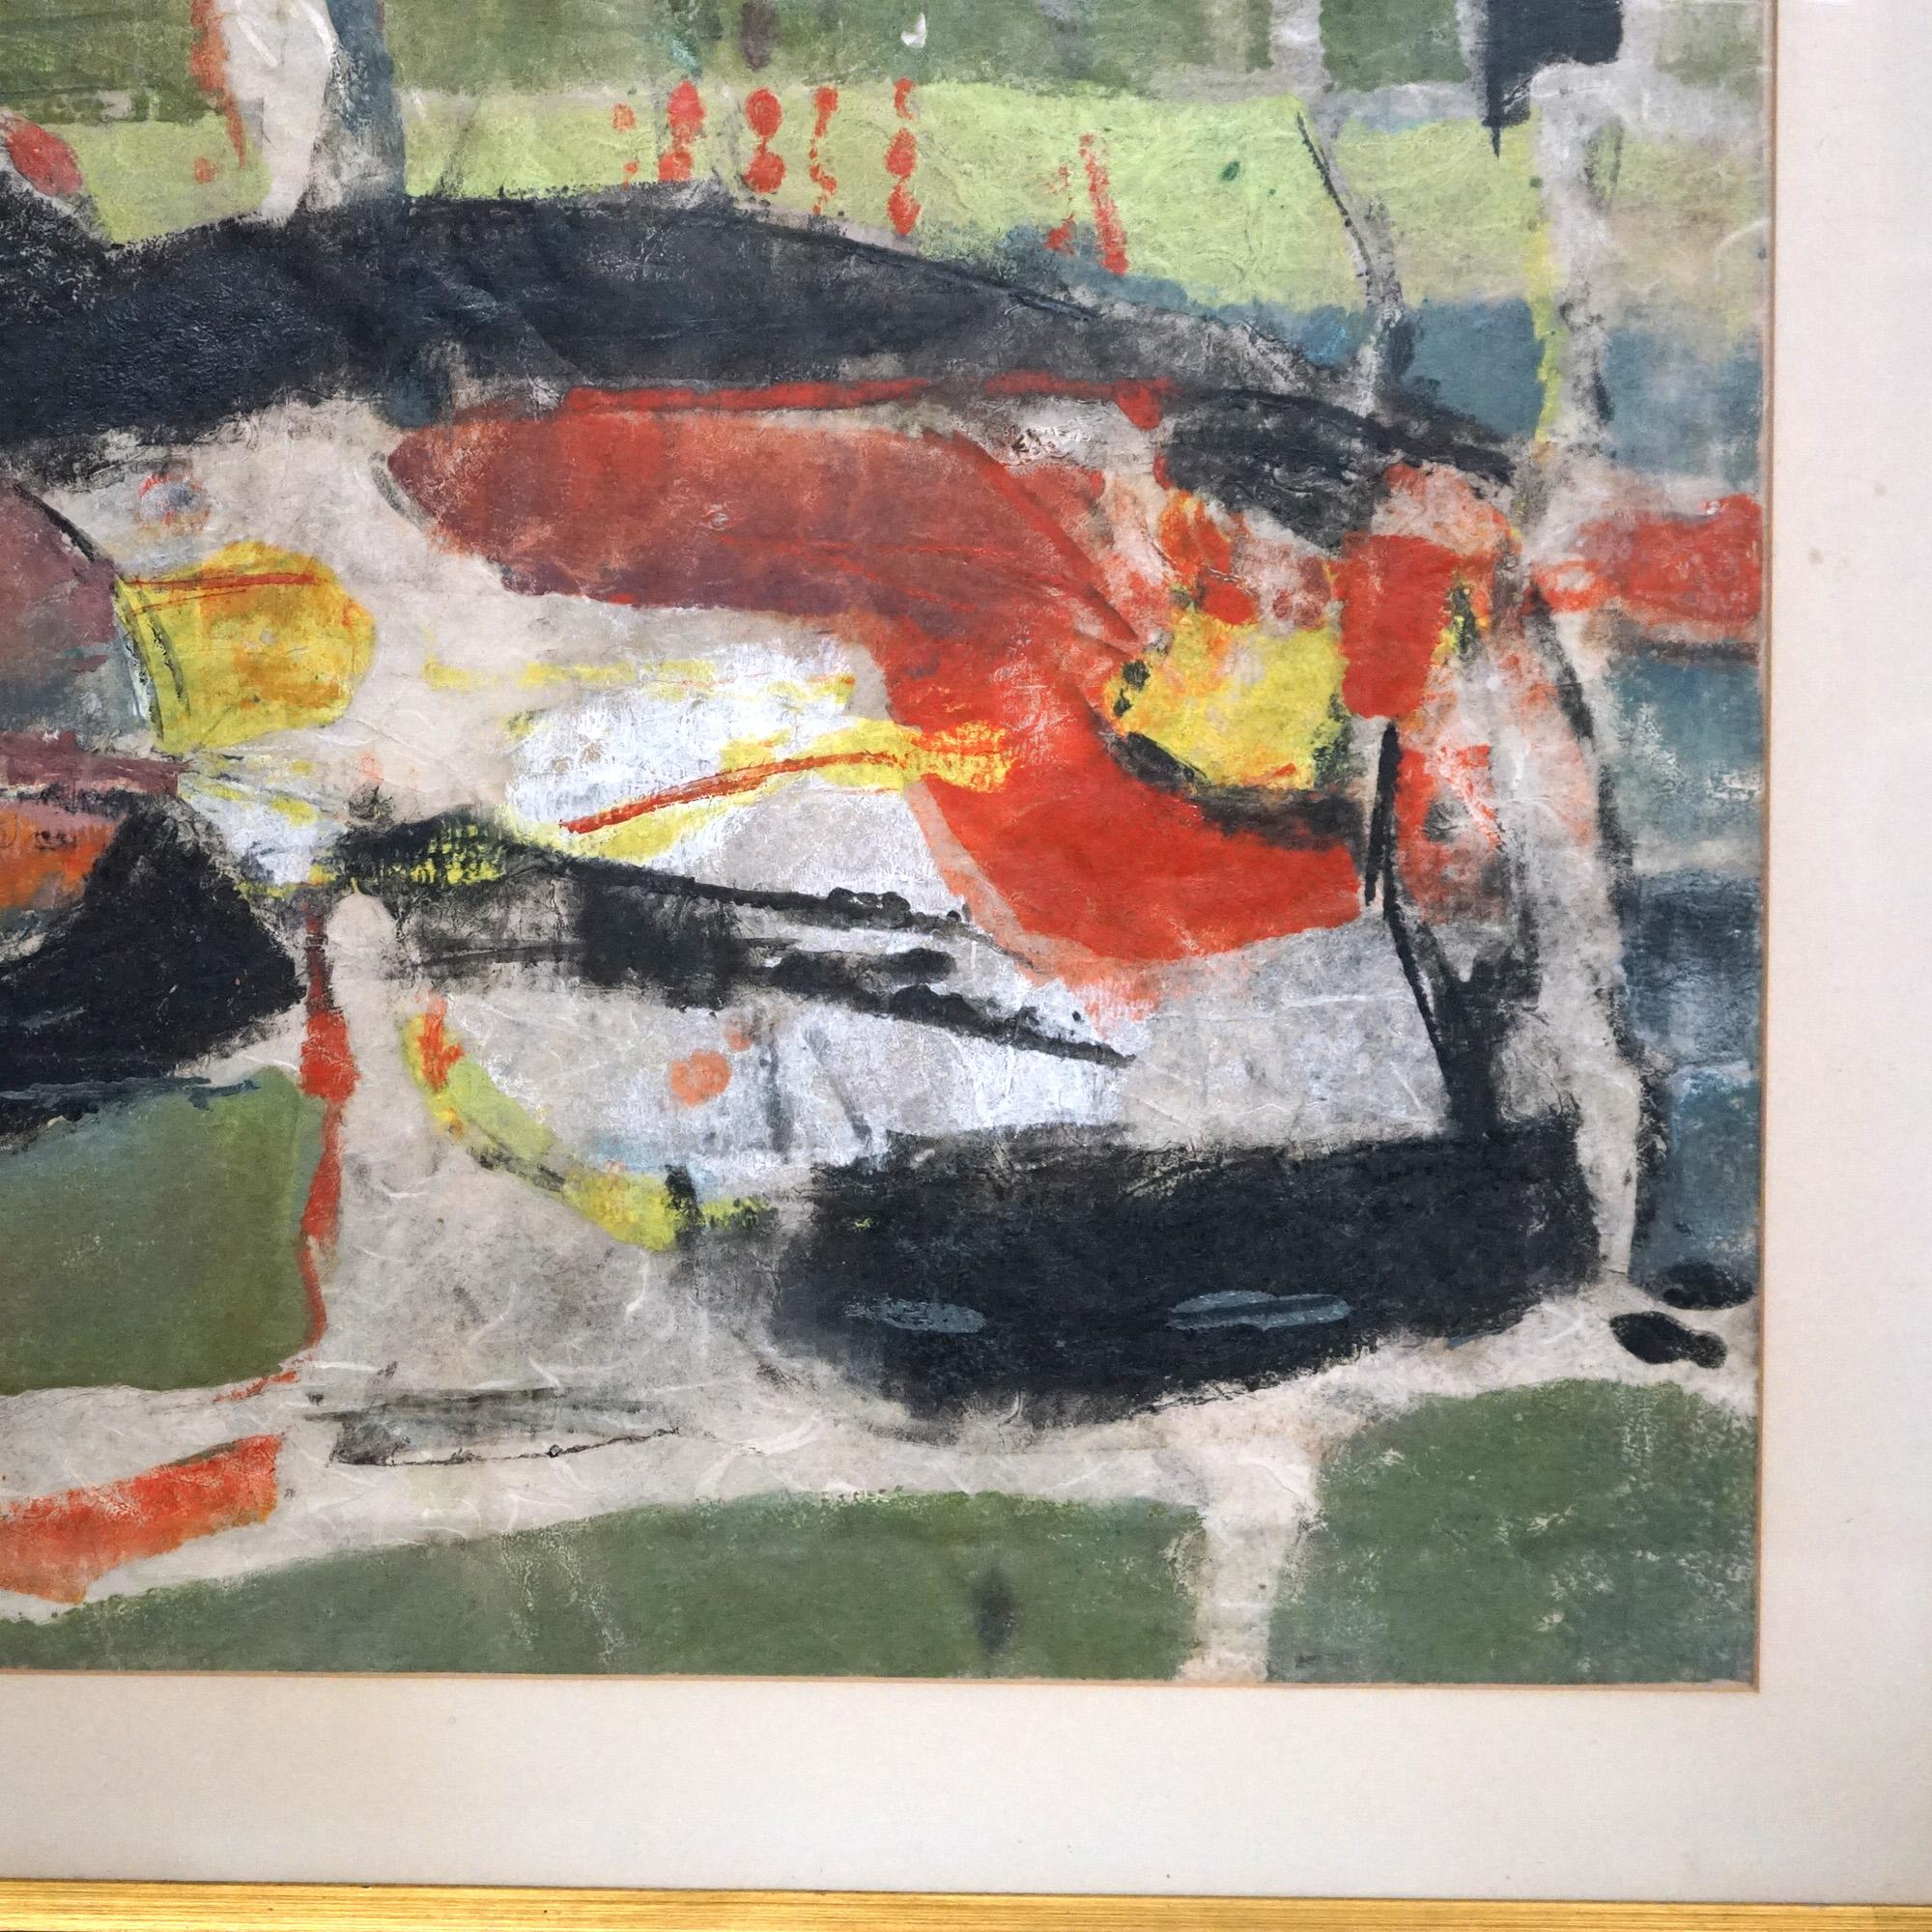 Paper Mid Century Modern Mixed Media Abstract “Bayou” Painting By D. Hoyt, Mid-20thC For Sale